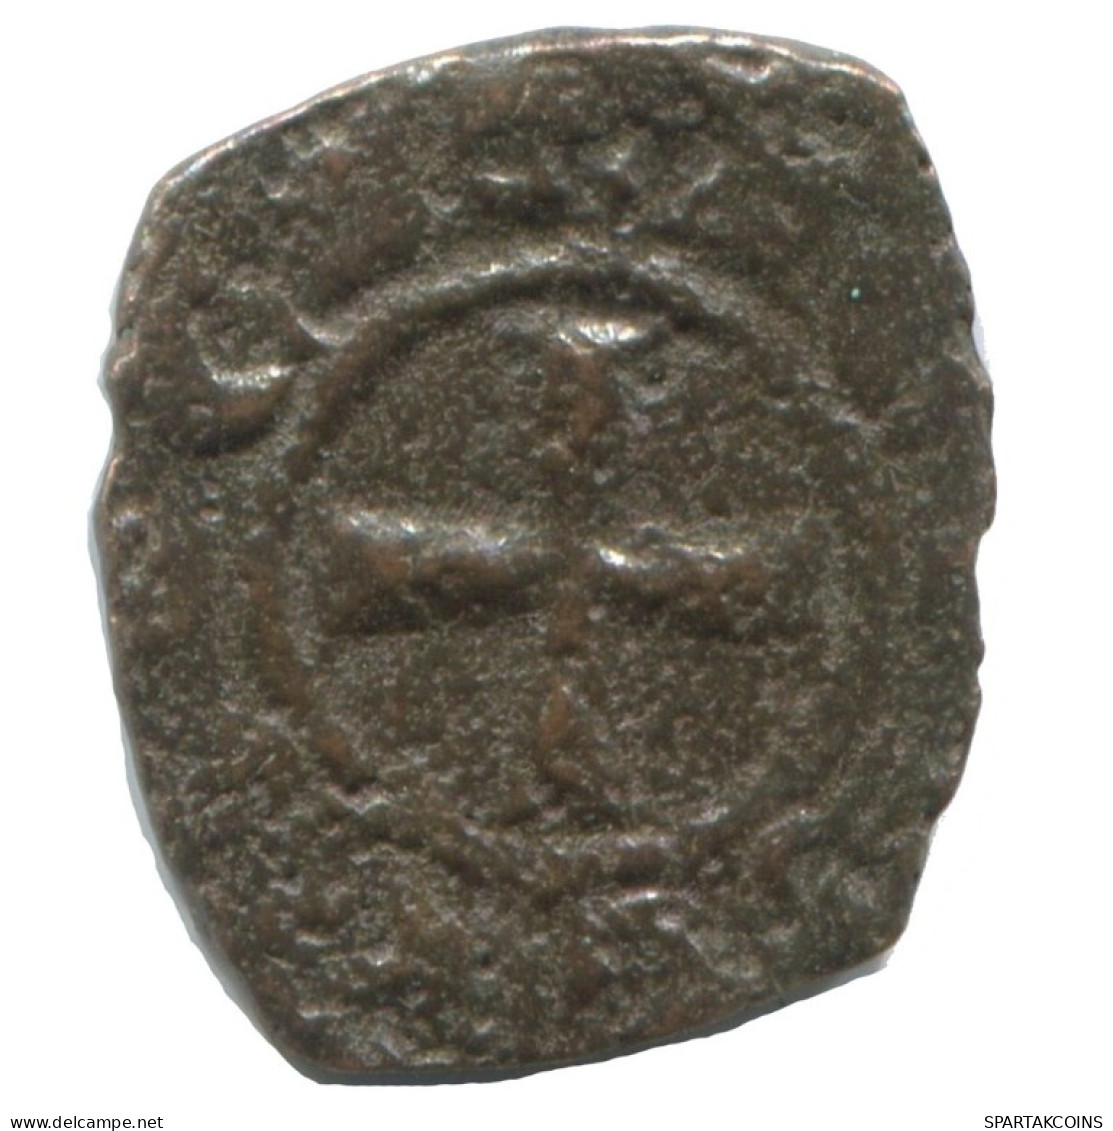 CRUSADER CROSS Authentic Original MEDIEVAL EUROPEAN Coin 0.9g/15mm #AC164.8.F.A - Other - Europe